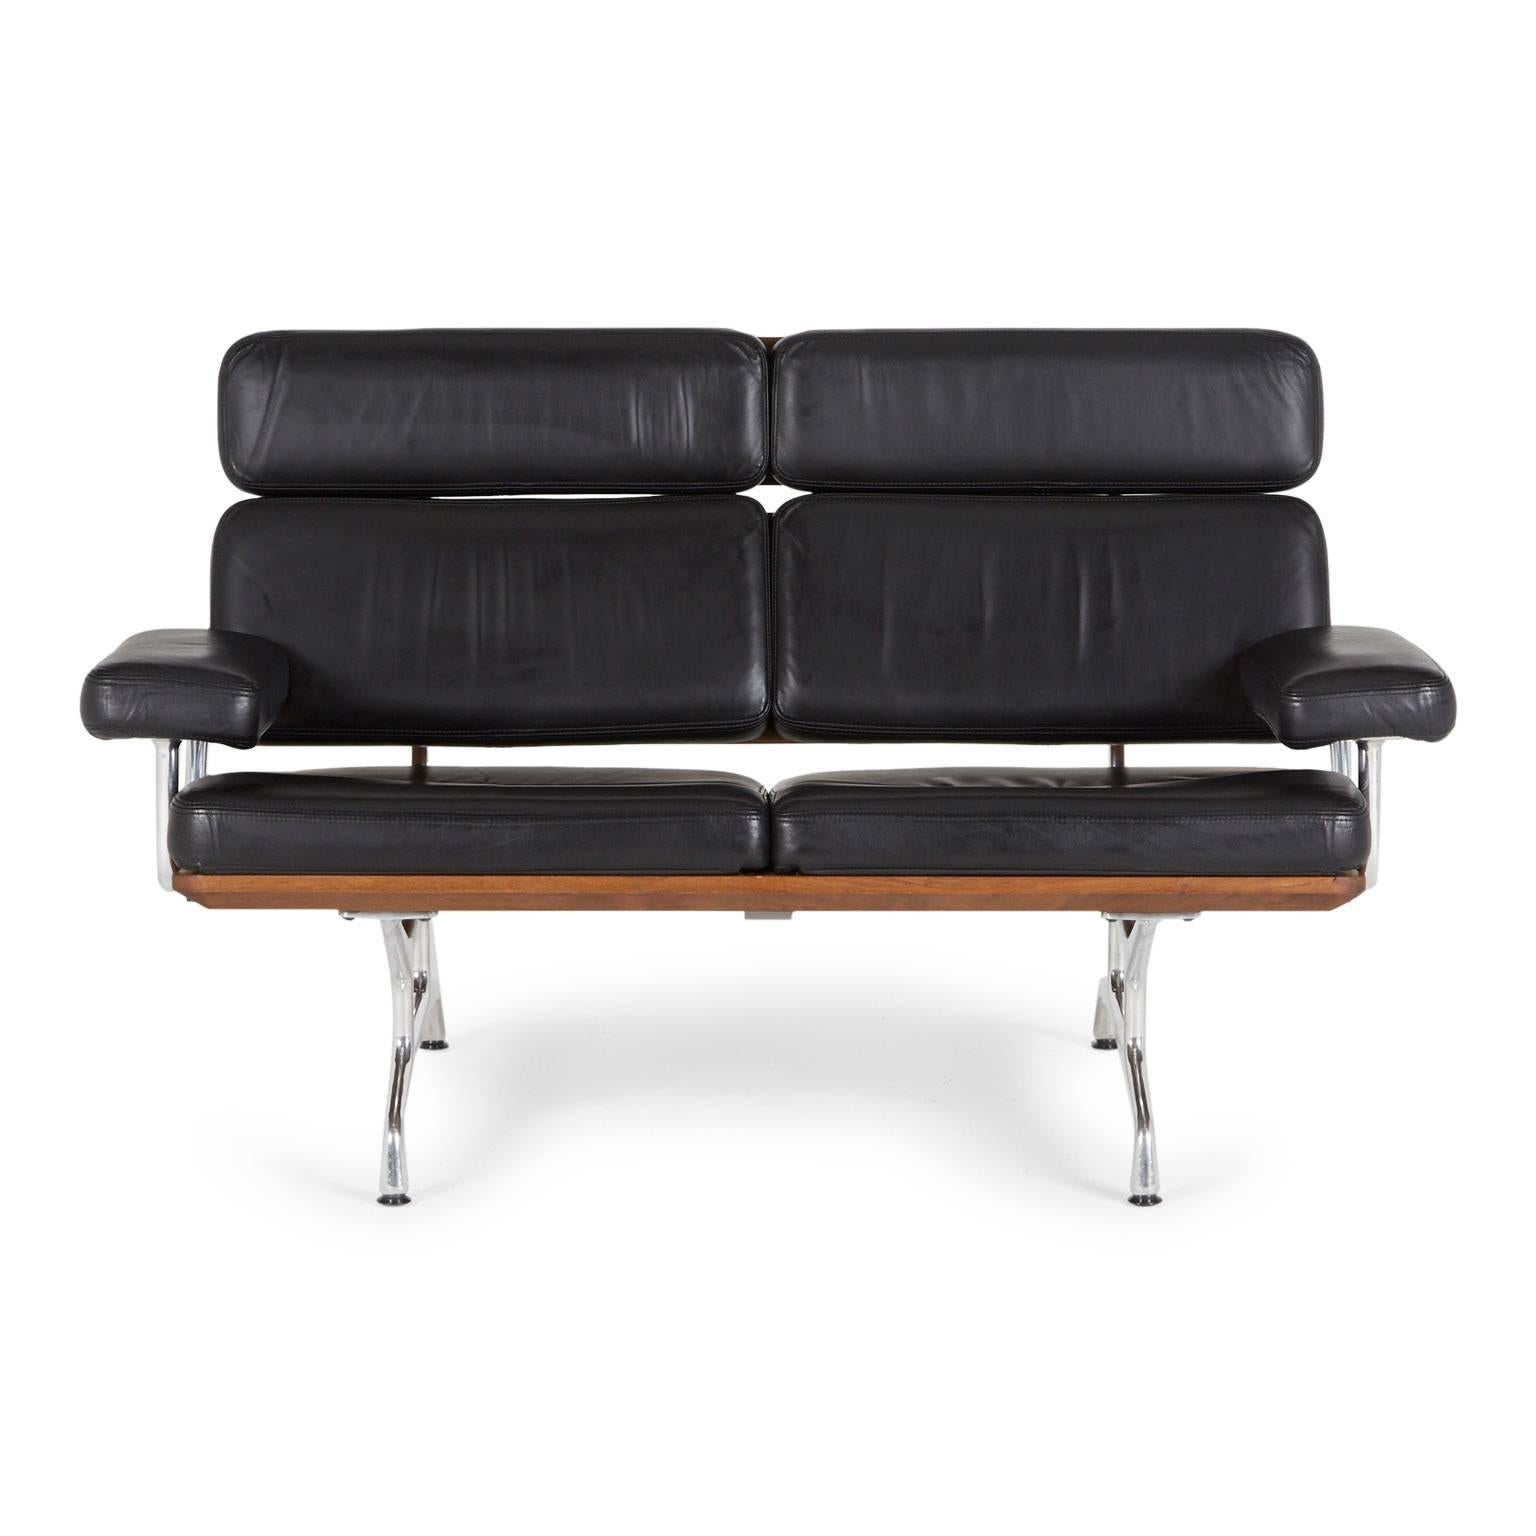 Featuring two floating solid wood teak backrest panels and plush foam cushions upholstered in black leather, this settee is equally fitting for a home or office space. The exemplary design would fuse well and complement a contemporary, Mid-Century